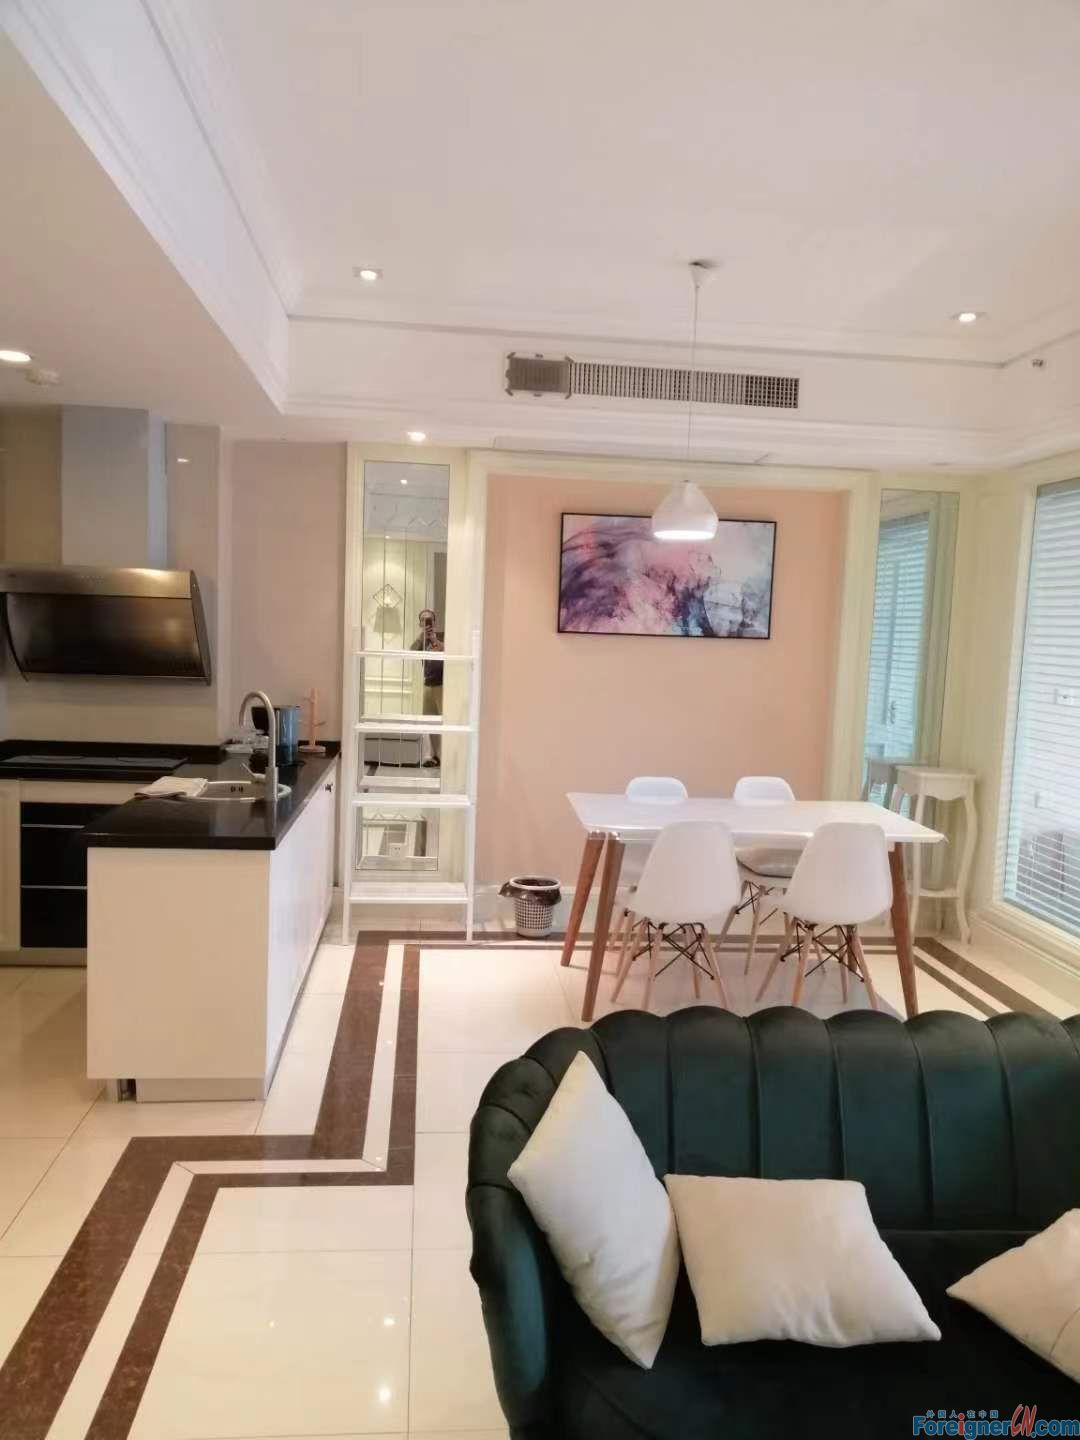 Terrific!! great Phoenix apartment rent in suzhou /2 rooms and 1 bathroom/Spacious; Bright/ with central AC/SIP/Xinghai Squaresubway line1/Suzhou center shoppingm mall